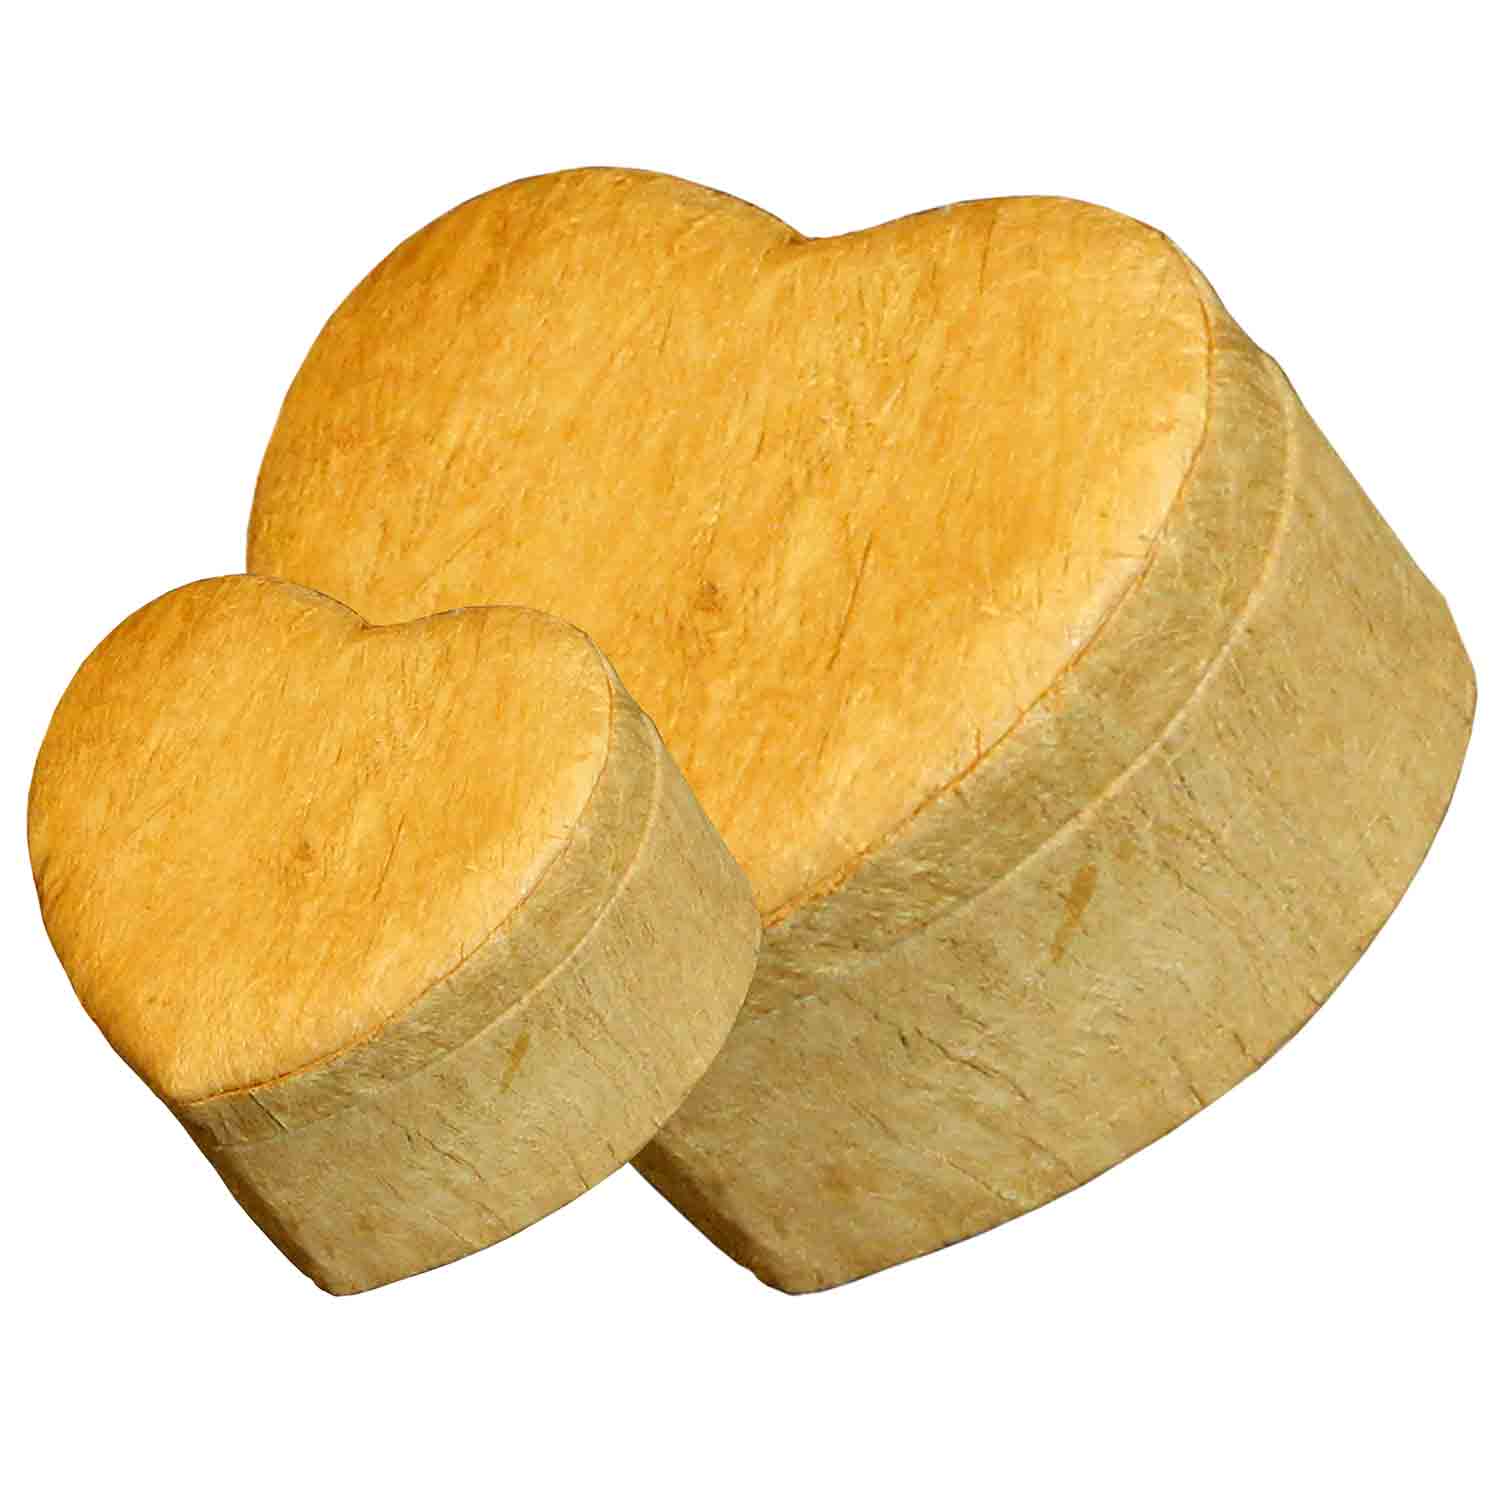 Heart Shaped Biodegradable Urn for Ashes in Wood Grain Small Comparison